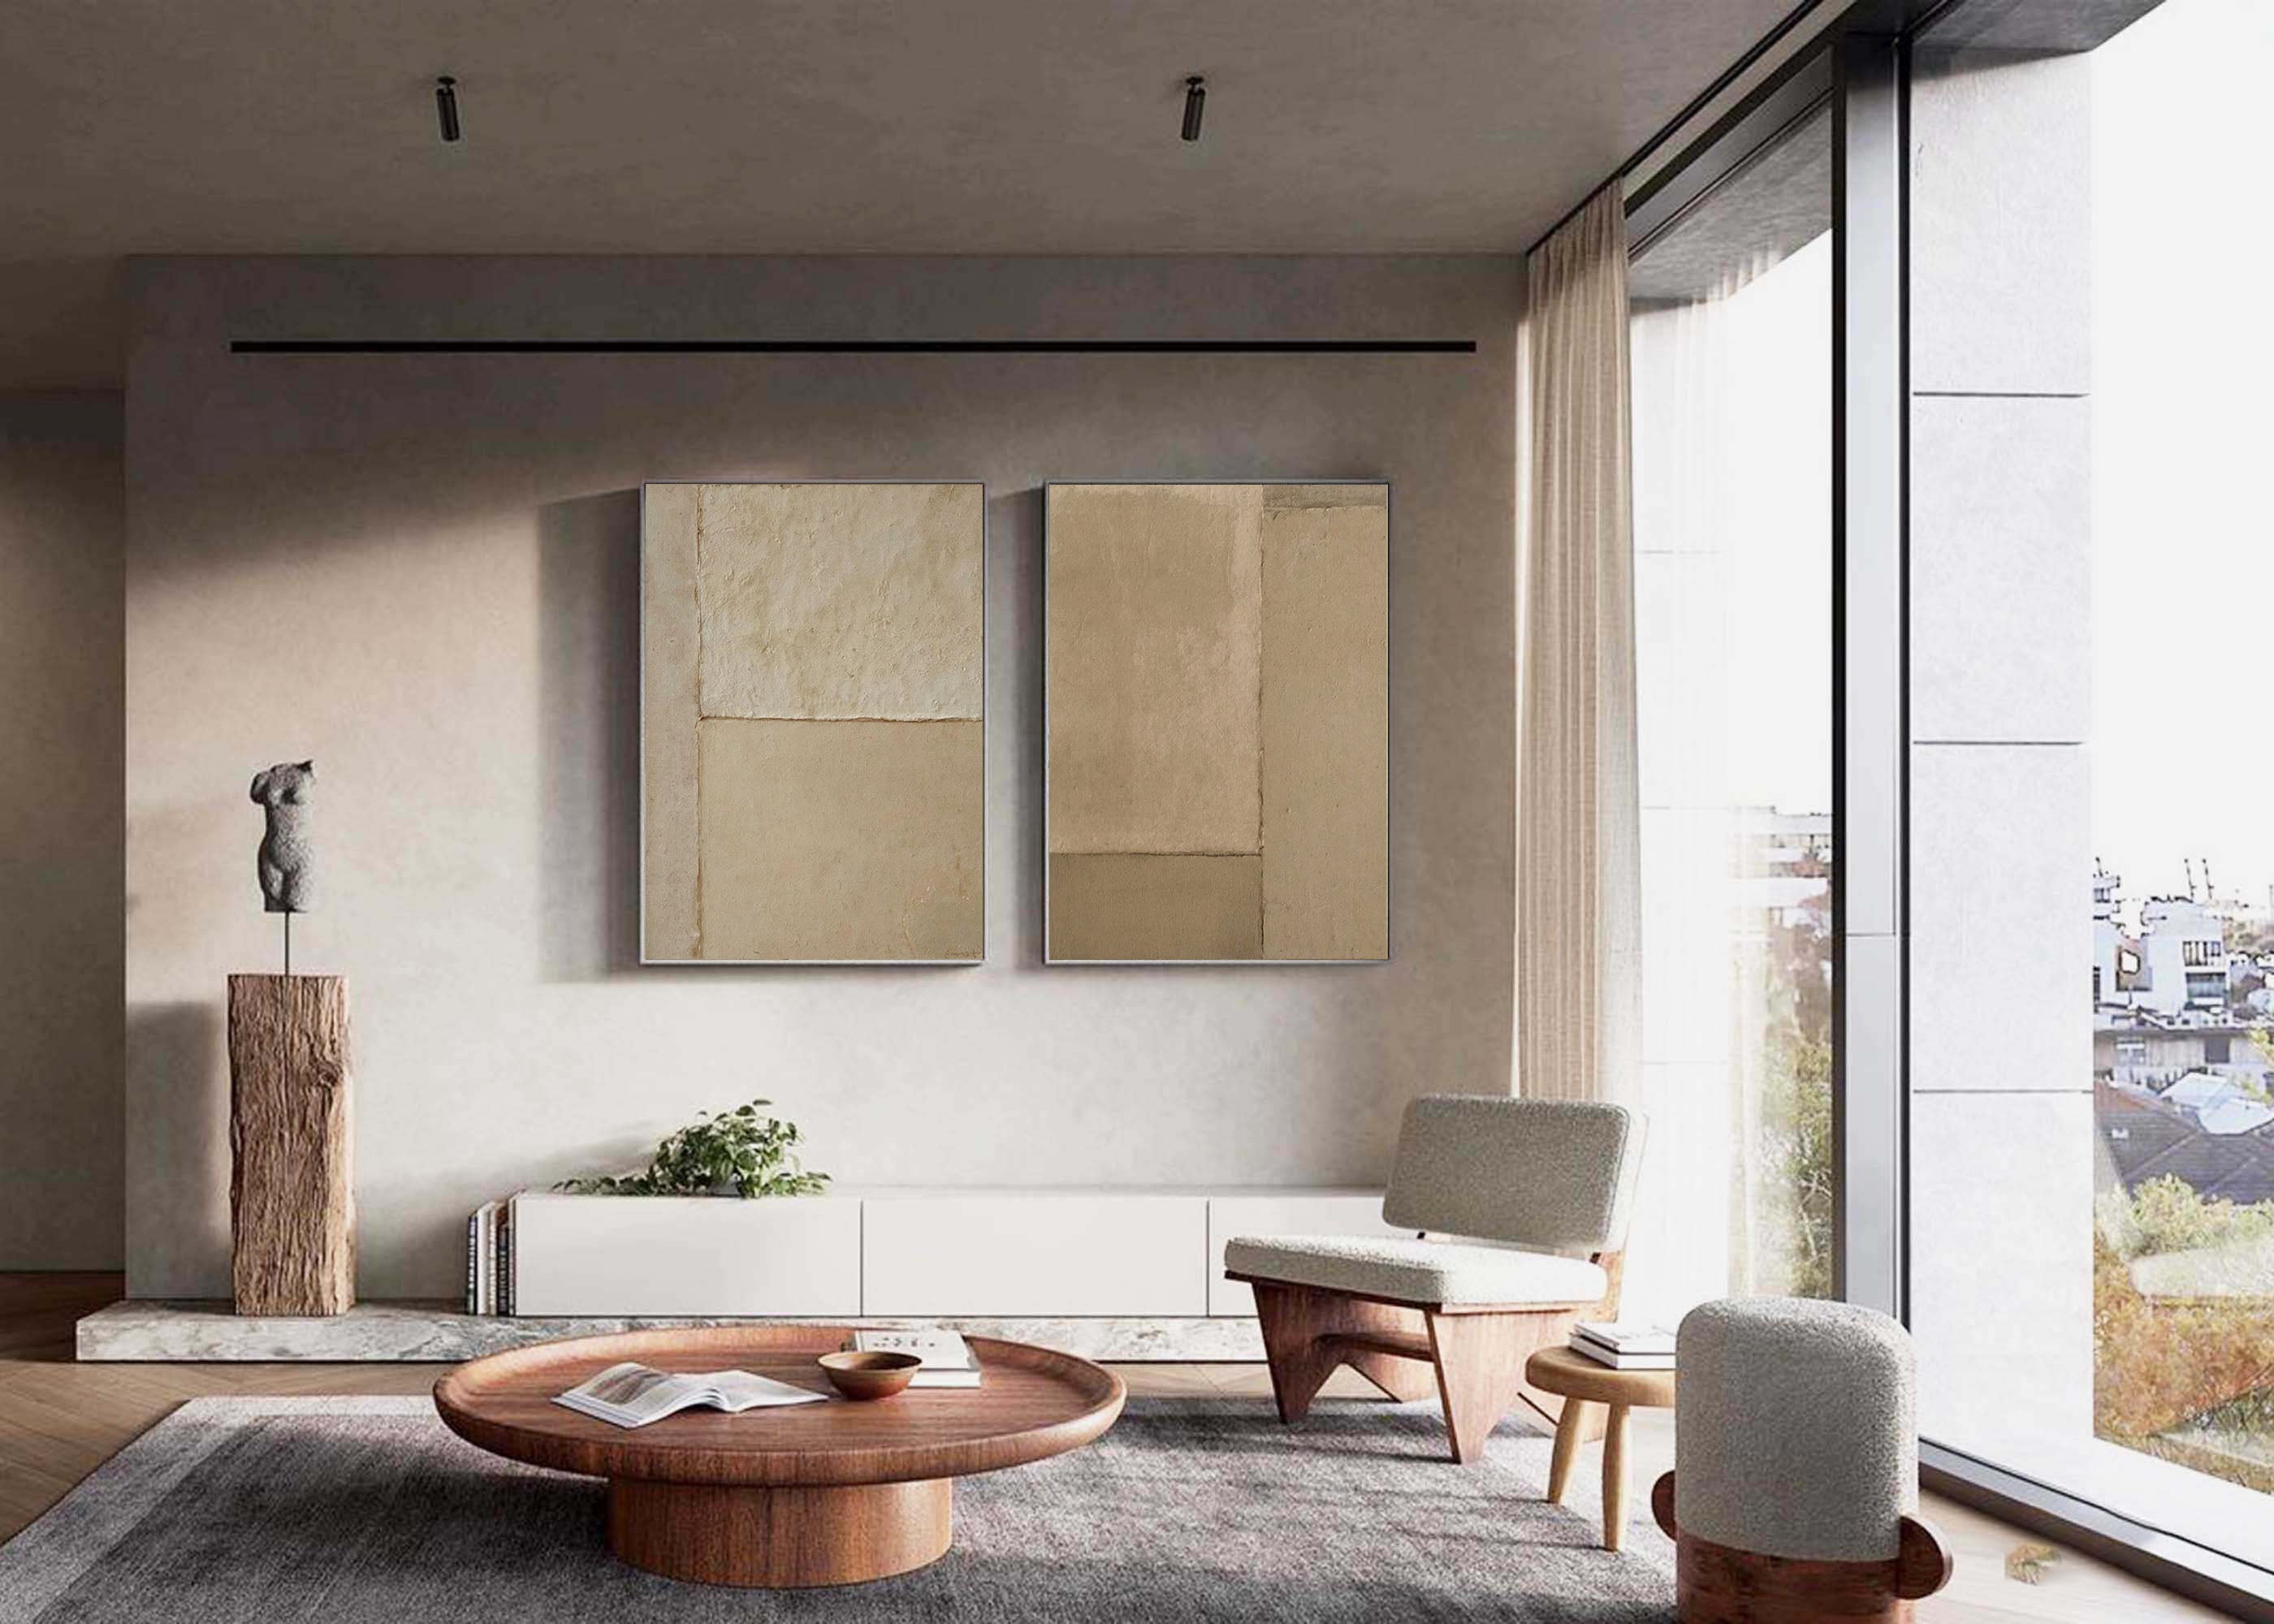 Beige & Brown Abstract Painting SET OF 2 #AVG 007